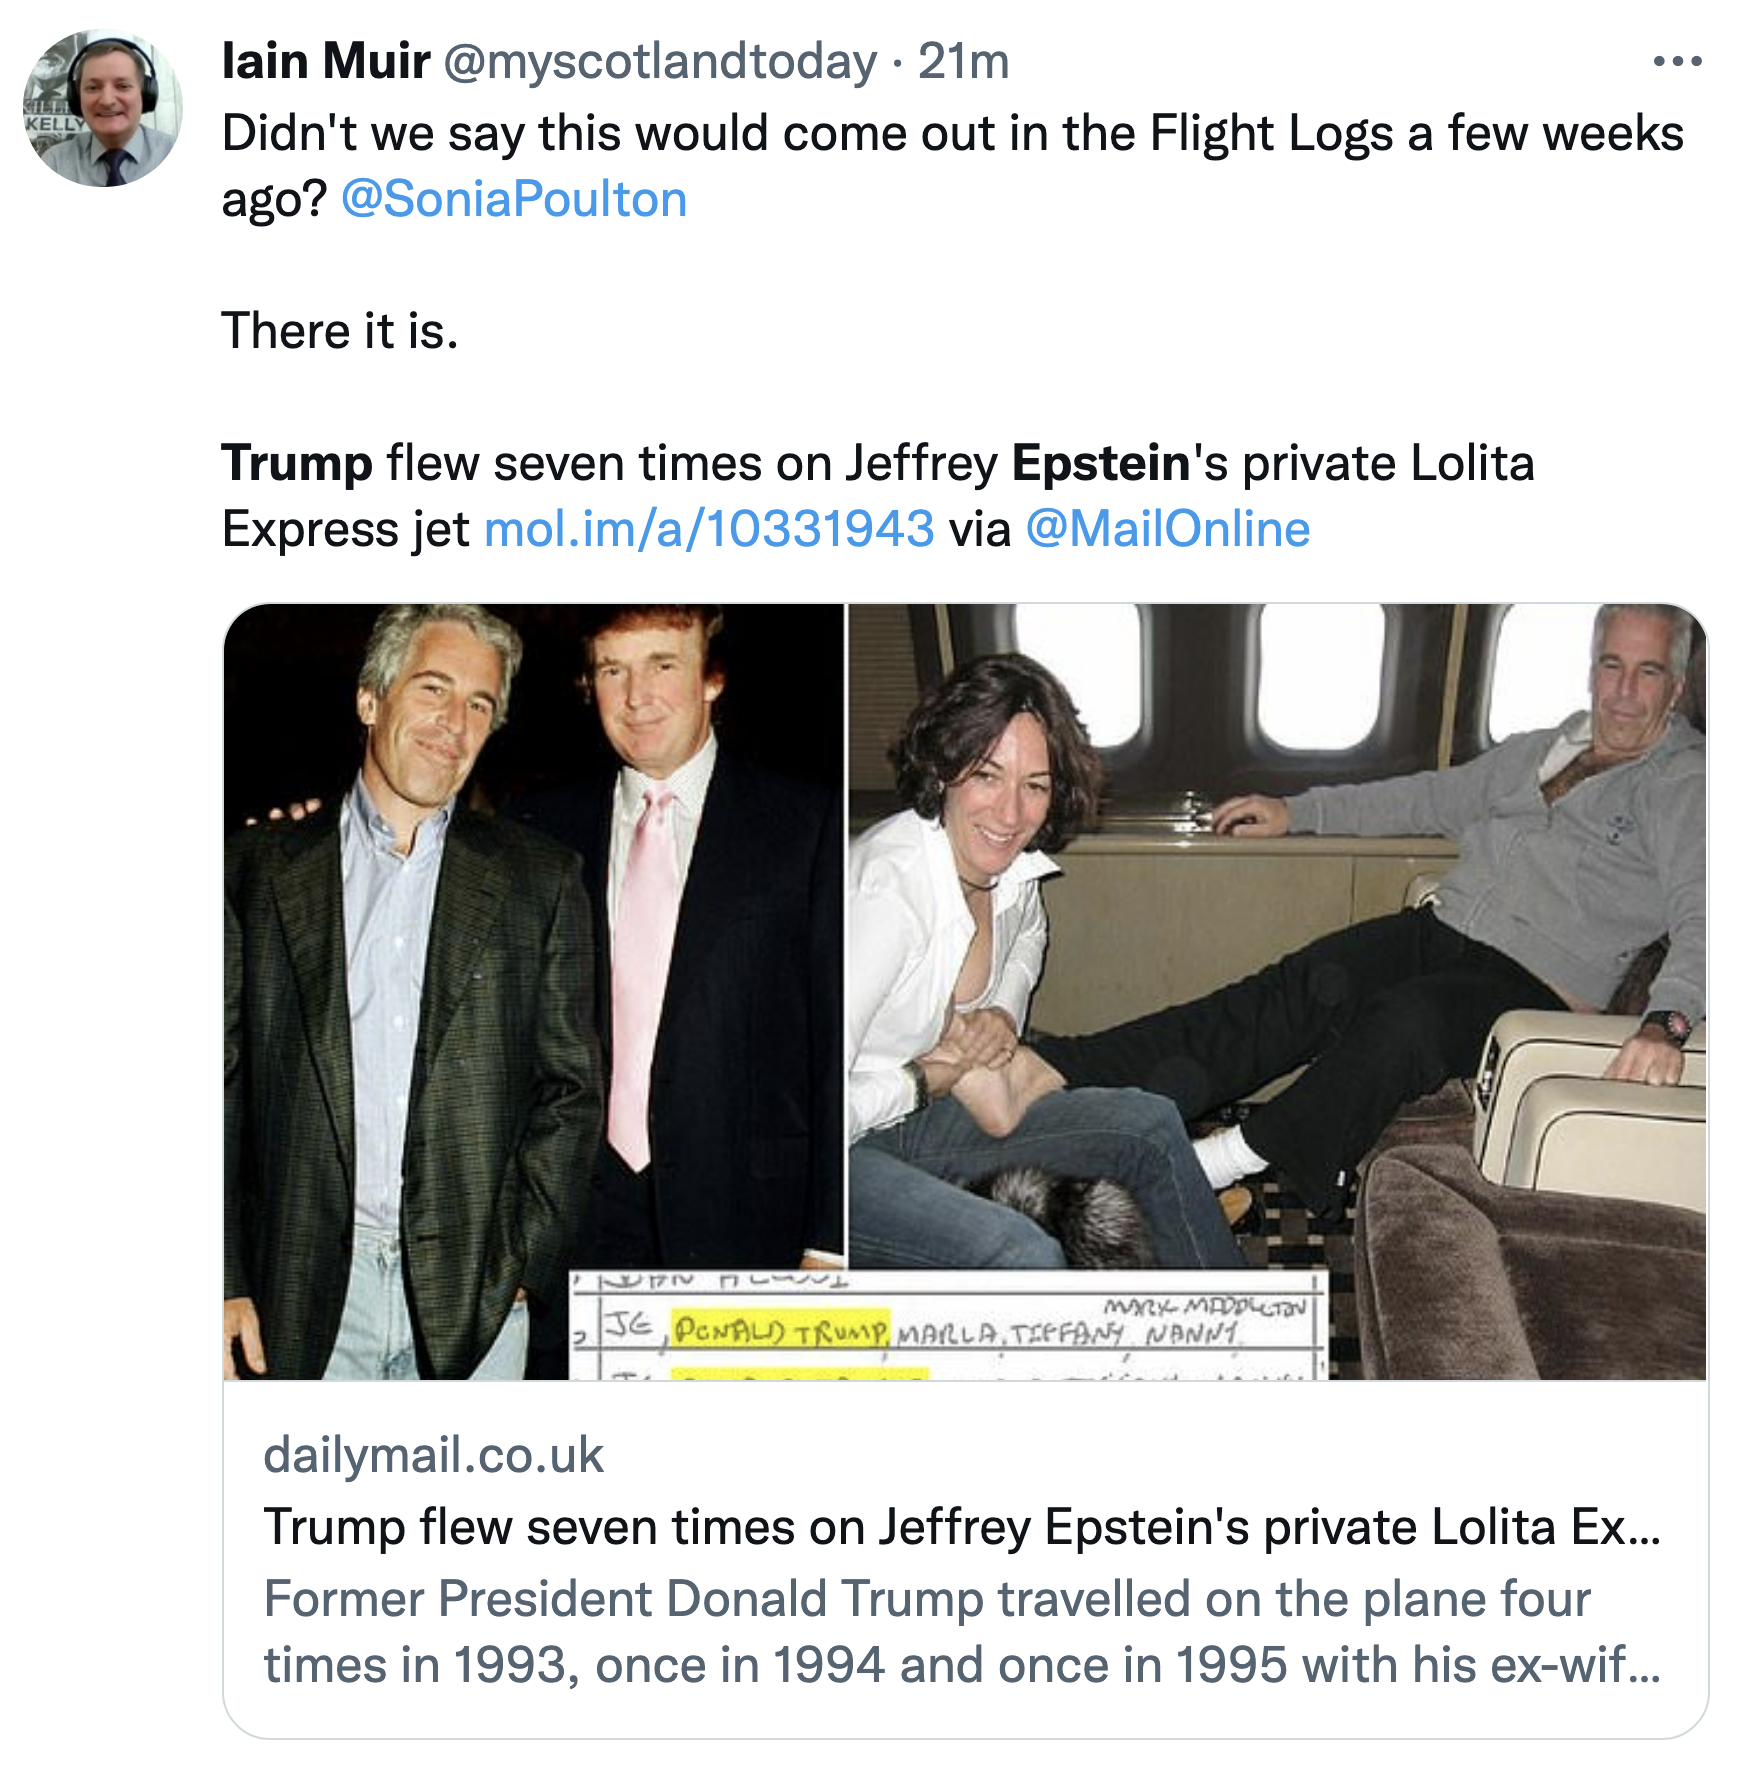 Screen-Shot-2021-12-21-at-4.22.16-PM Uncovered Flight Logs Allege Trump Flew With Epstein Many Times Corruption Donald Trump Featured Politics Top Stories 